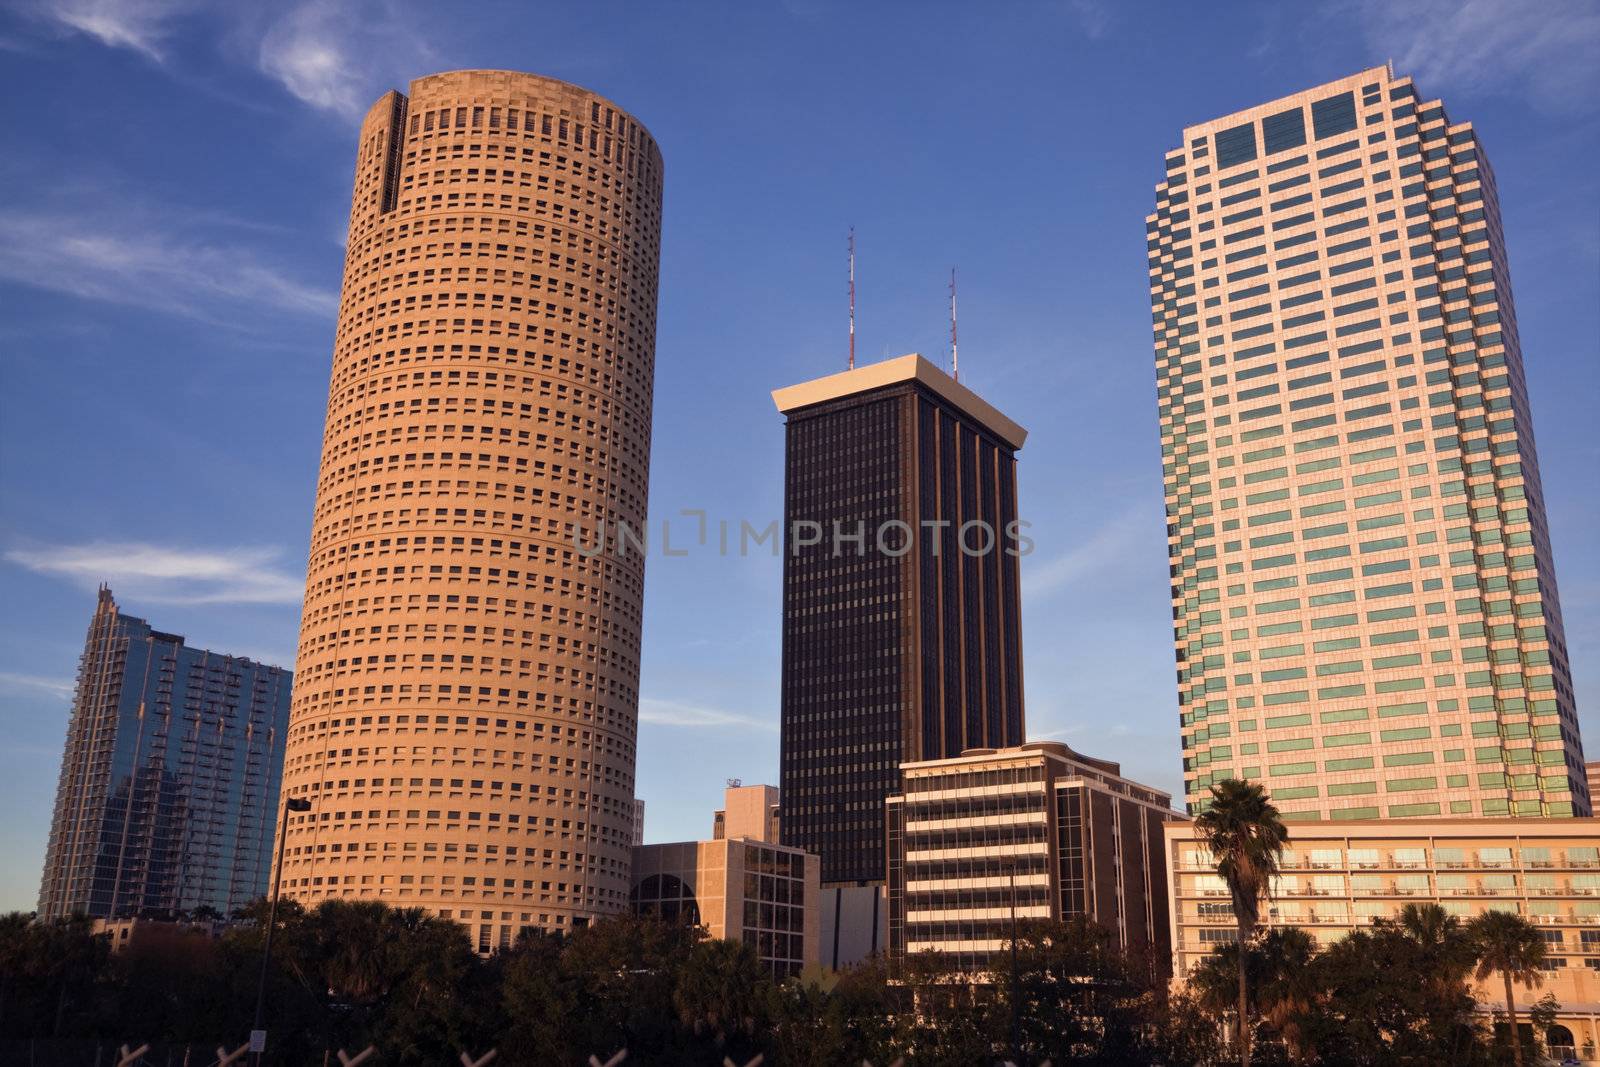 Afternoon in Tampa by benkrut